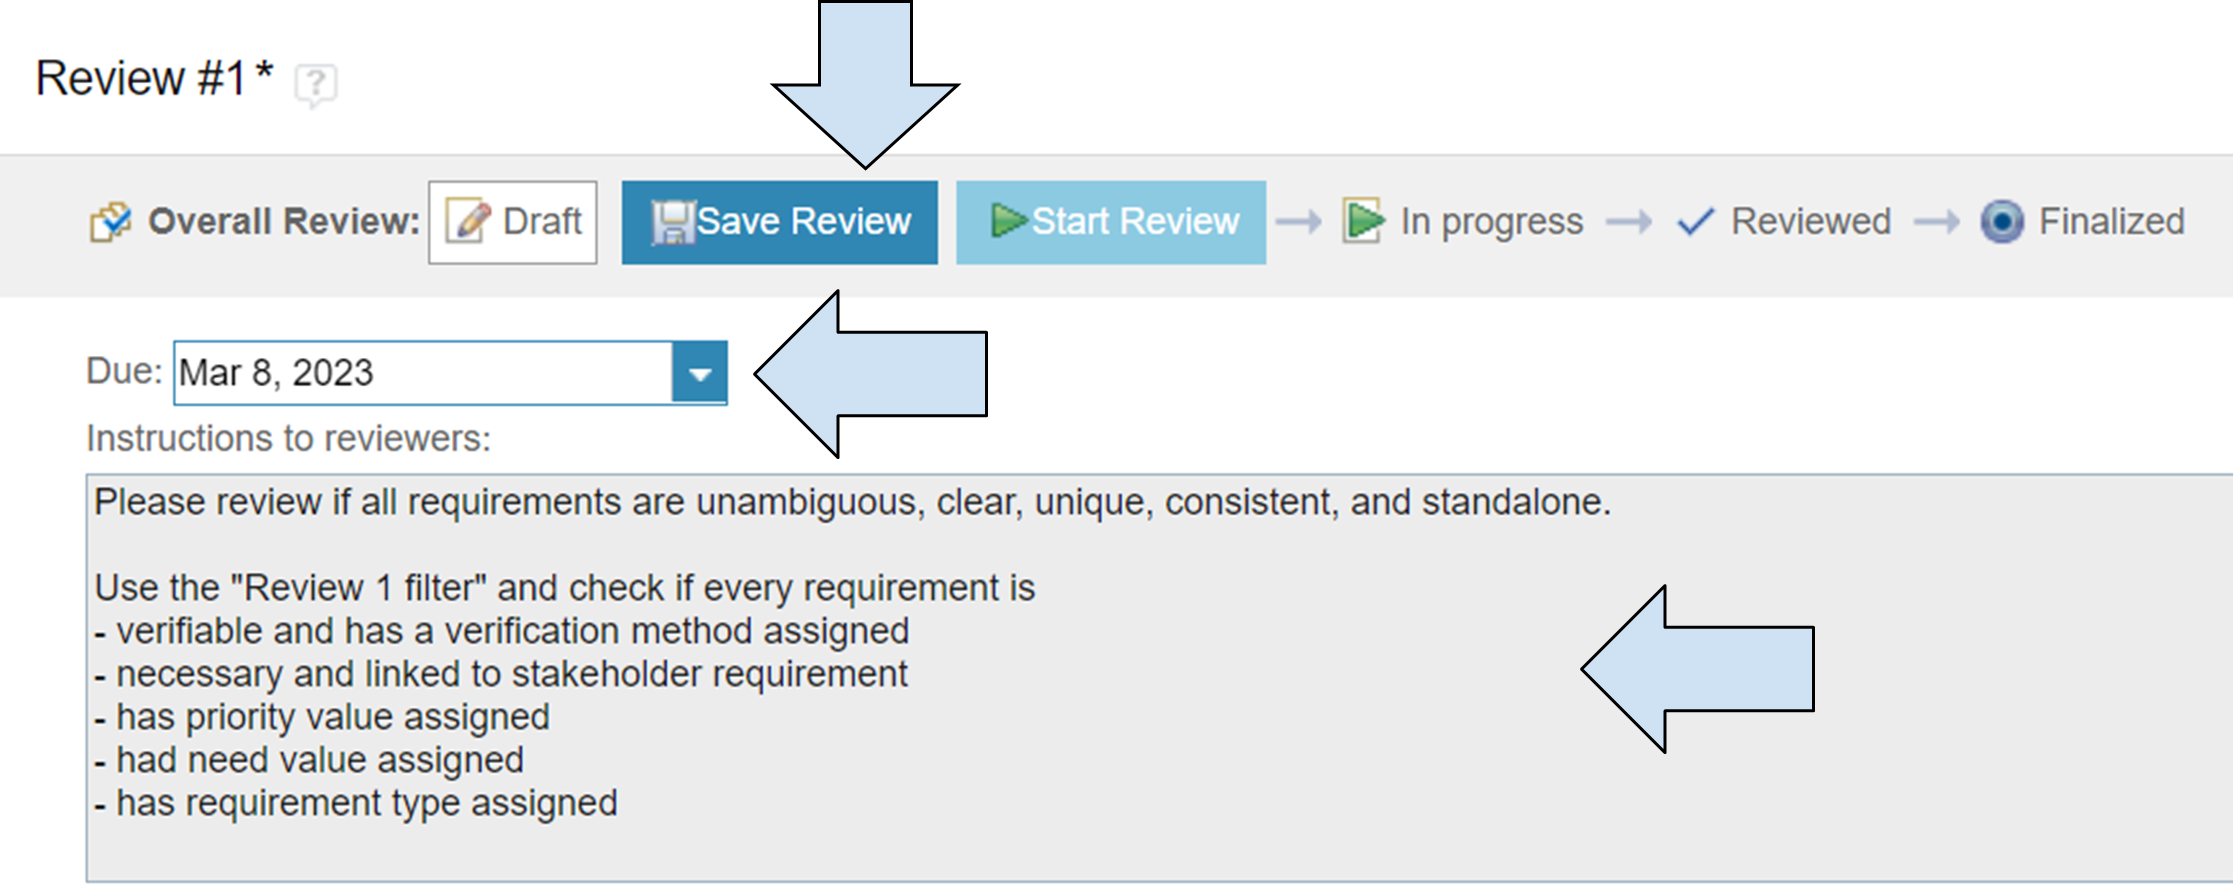 You can draft, save or start a review, which can be in progress, reviewed, or finalized. You can set the due date for it and instructions